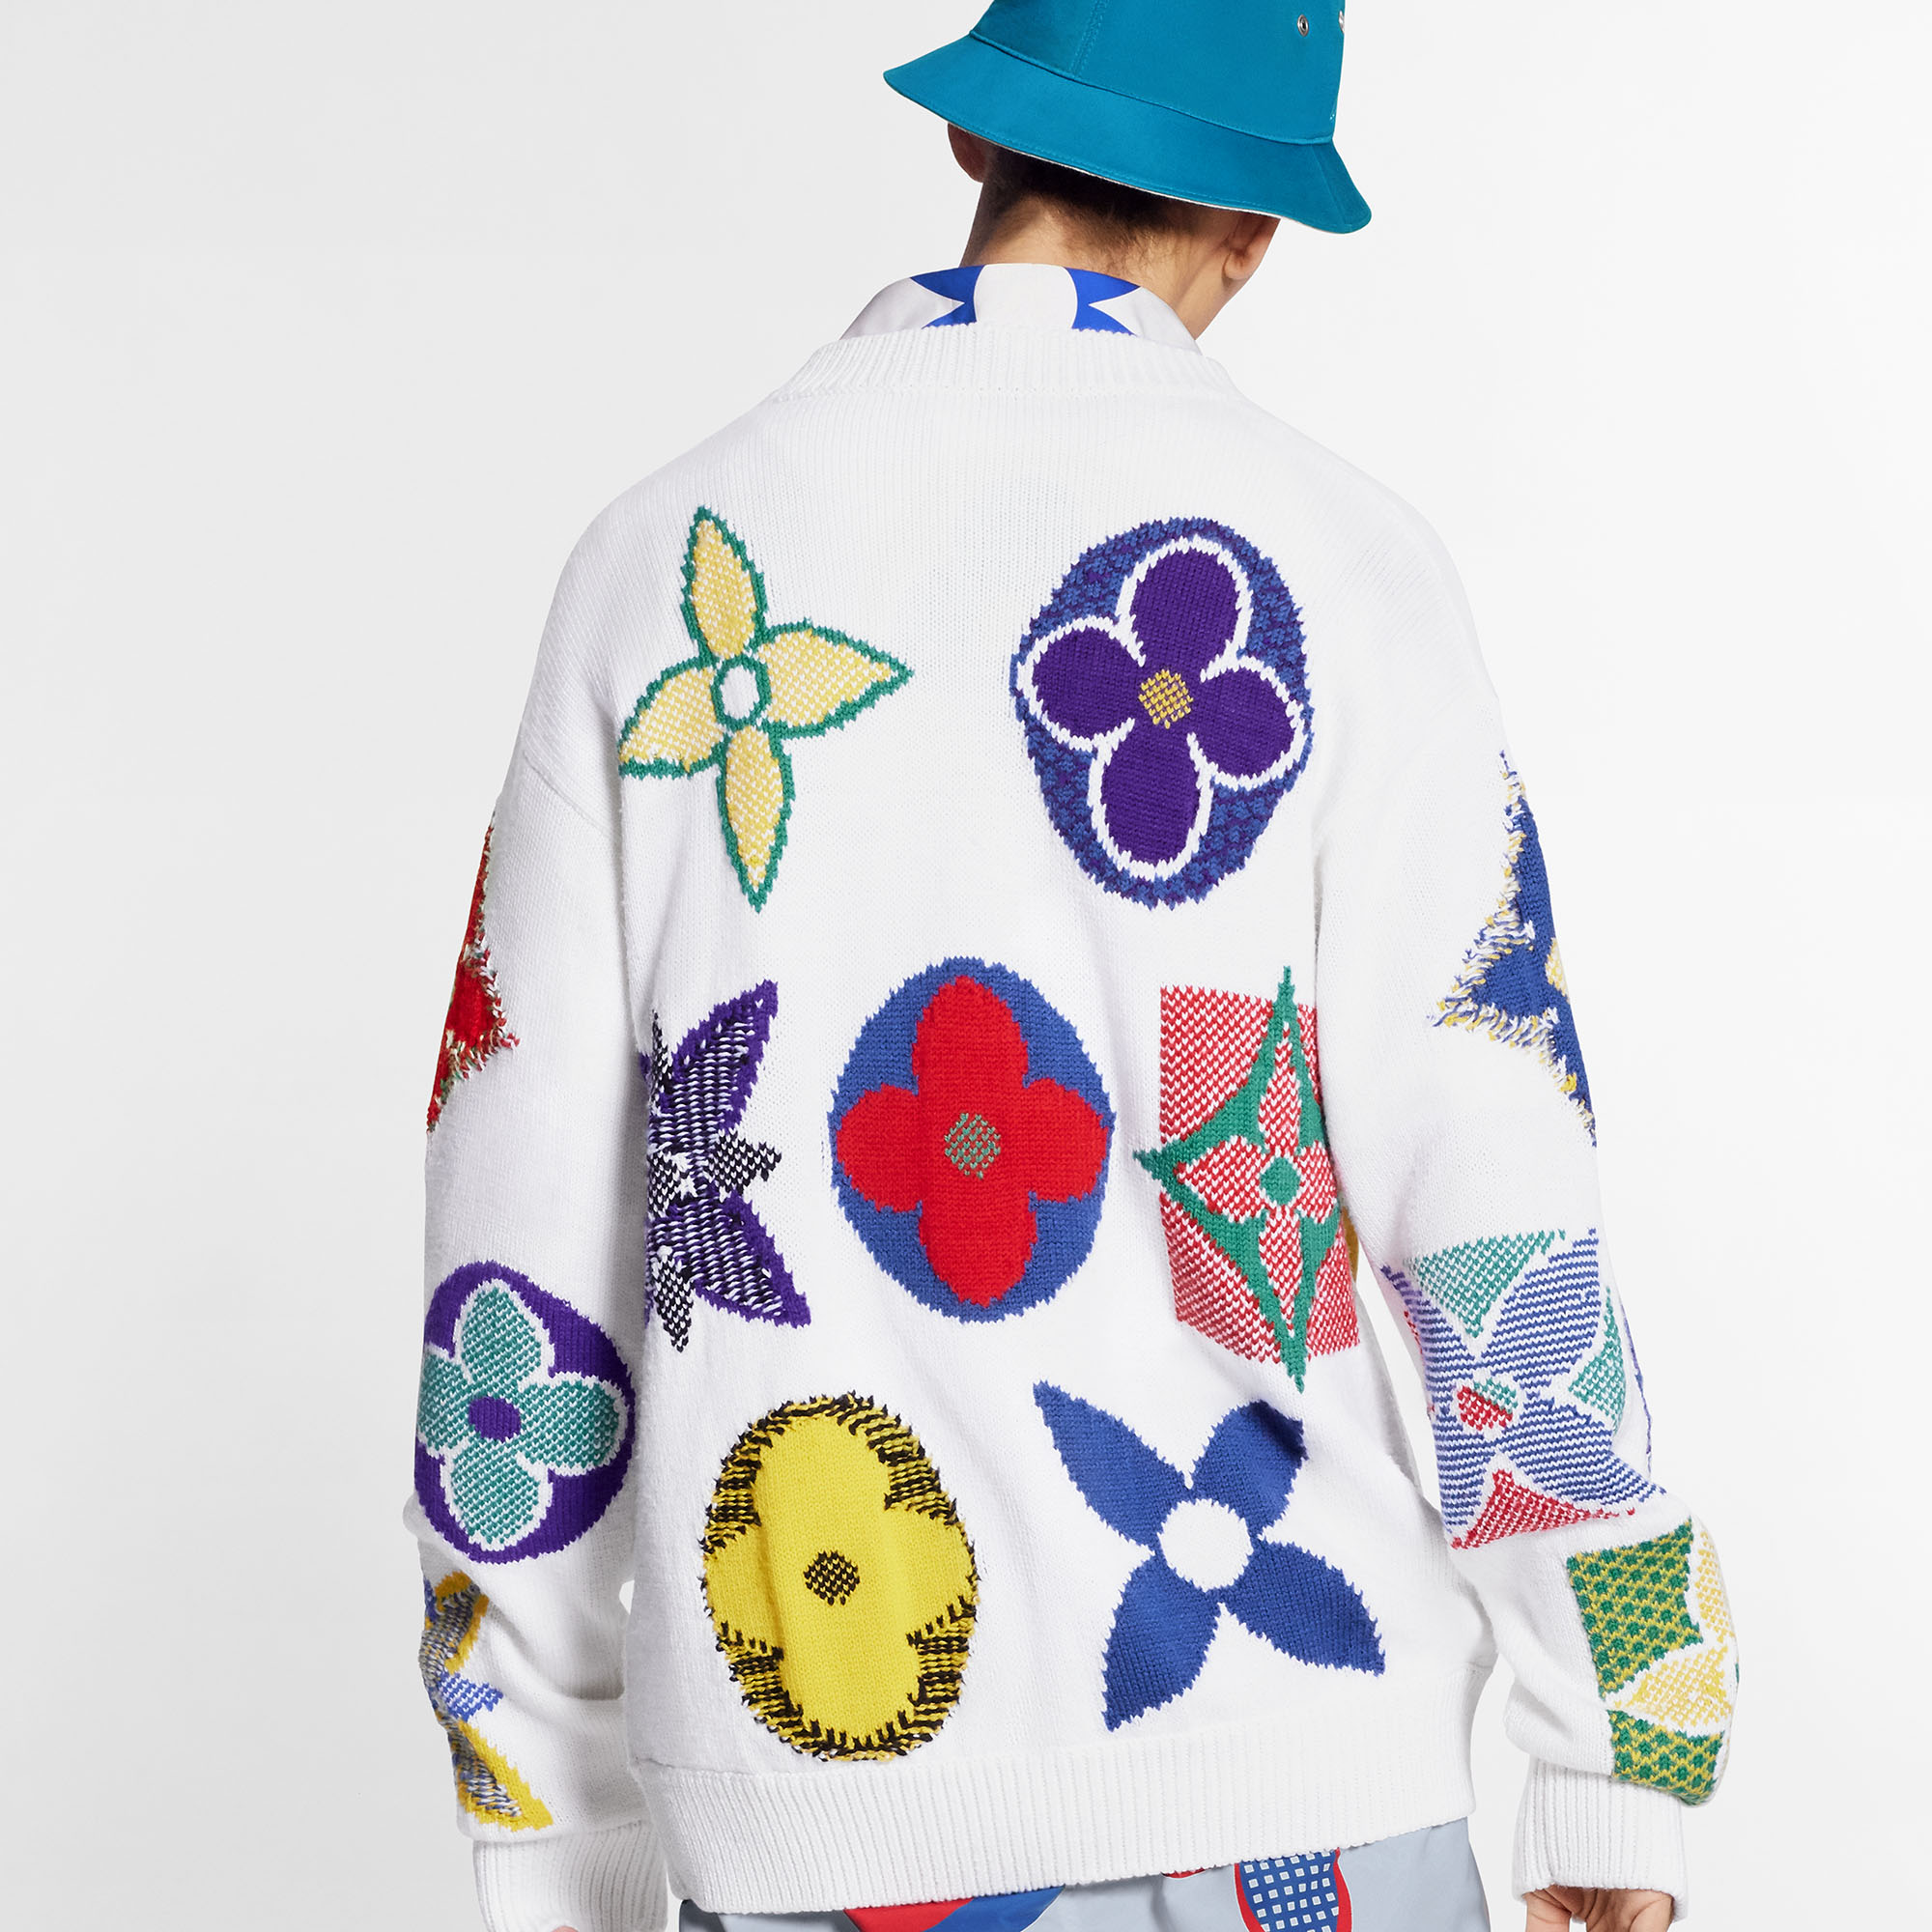 The Artistic Vision of Virgil Abloh Comes to Life in Louis Vuitton's Latest  Capsule Collection – TITLE MAG